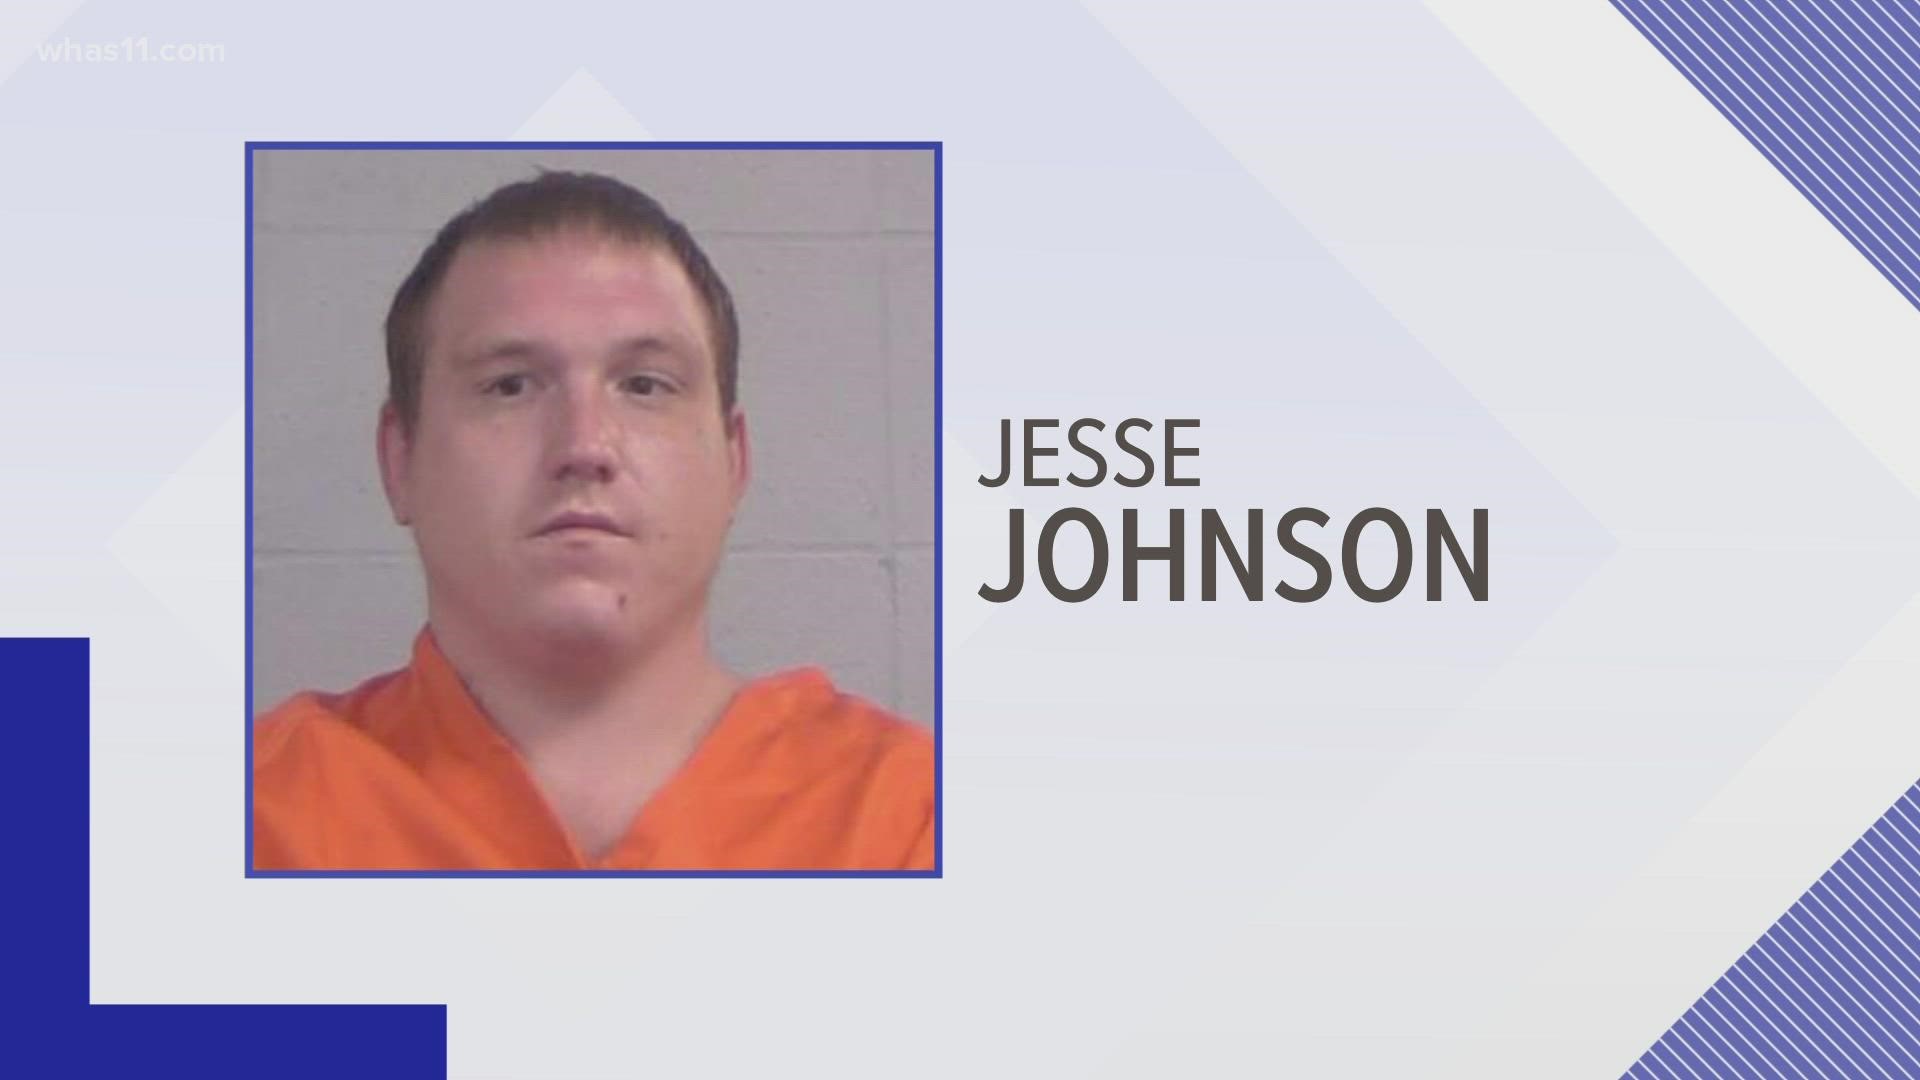 Jesse Johnson, along with two others, have been indicted by a federal grand jury for their role in an August 2021 carjacking.